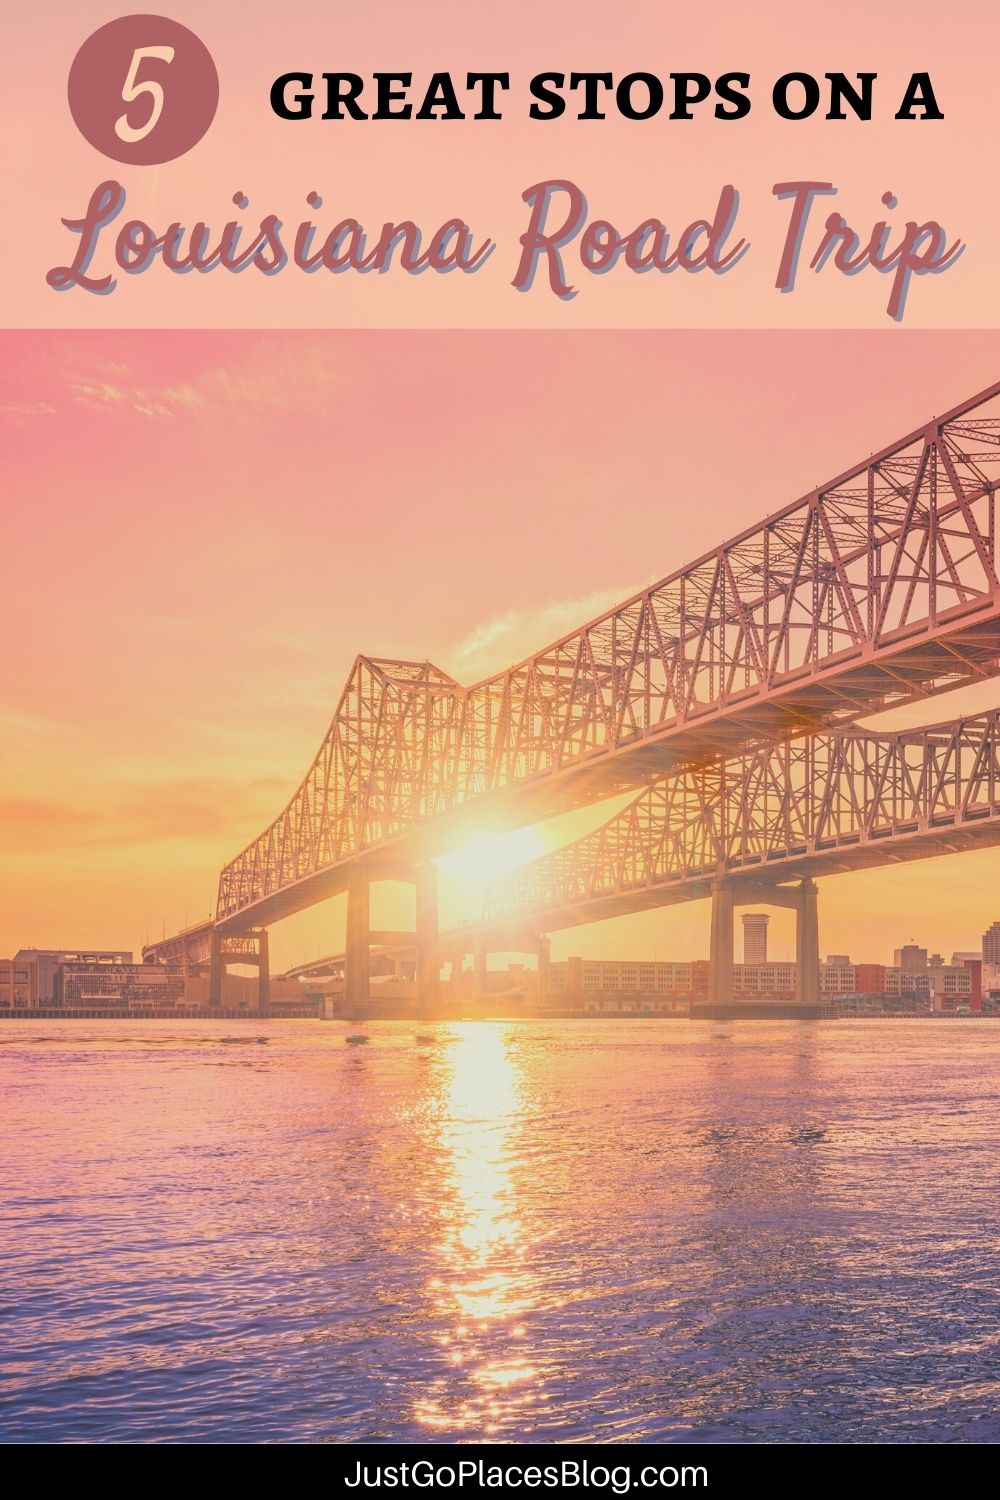 Pinterest image of the Mississippi River at sunset connecting to New Orleans with the text: 5 Great Stops on a Louisiana Road Trip